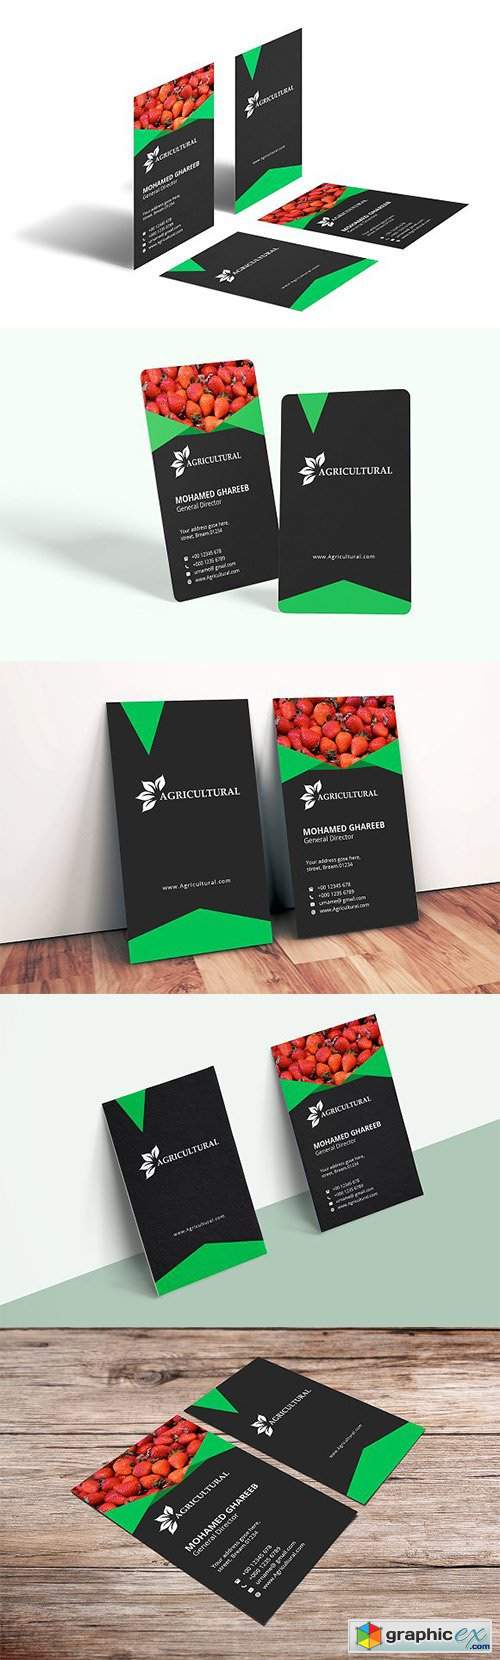 Agriculture Business Card 2633130